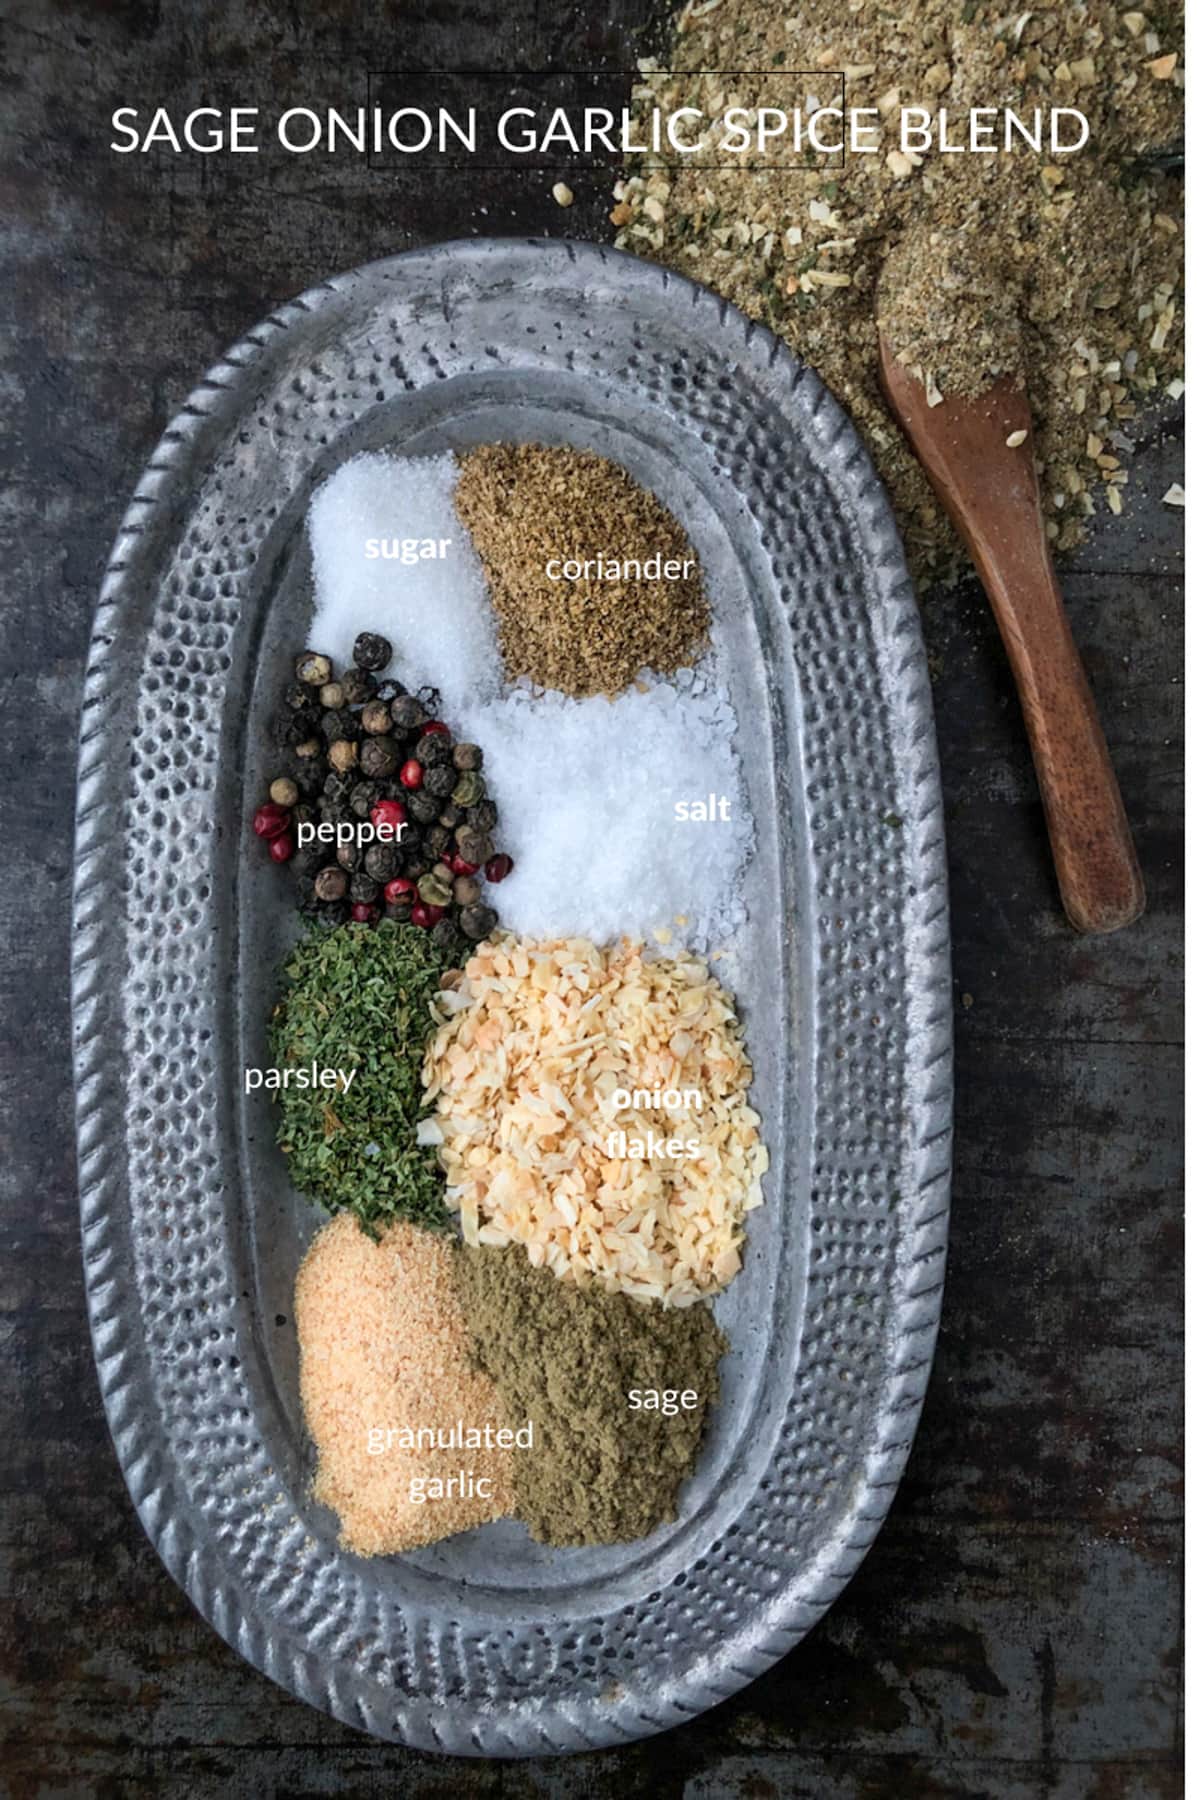 Silver tray with piles of spices for Sage seasoning blend.